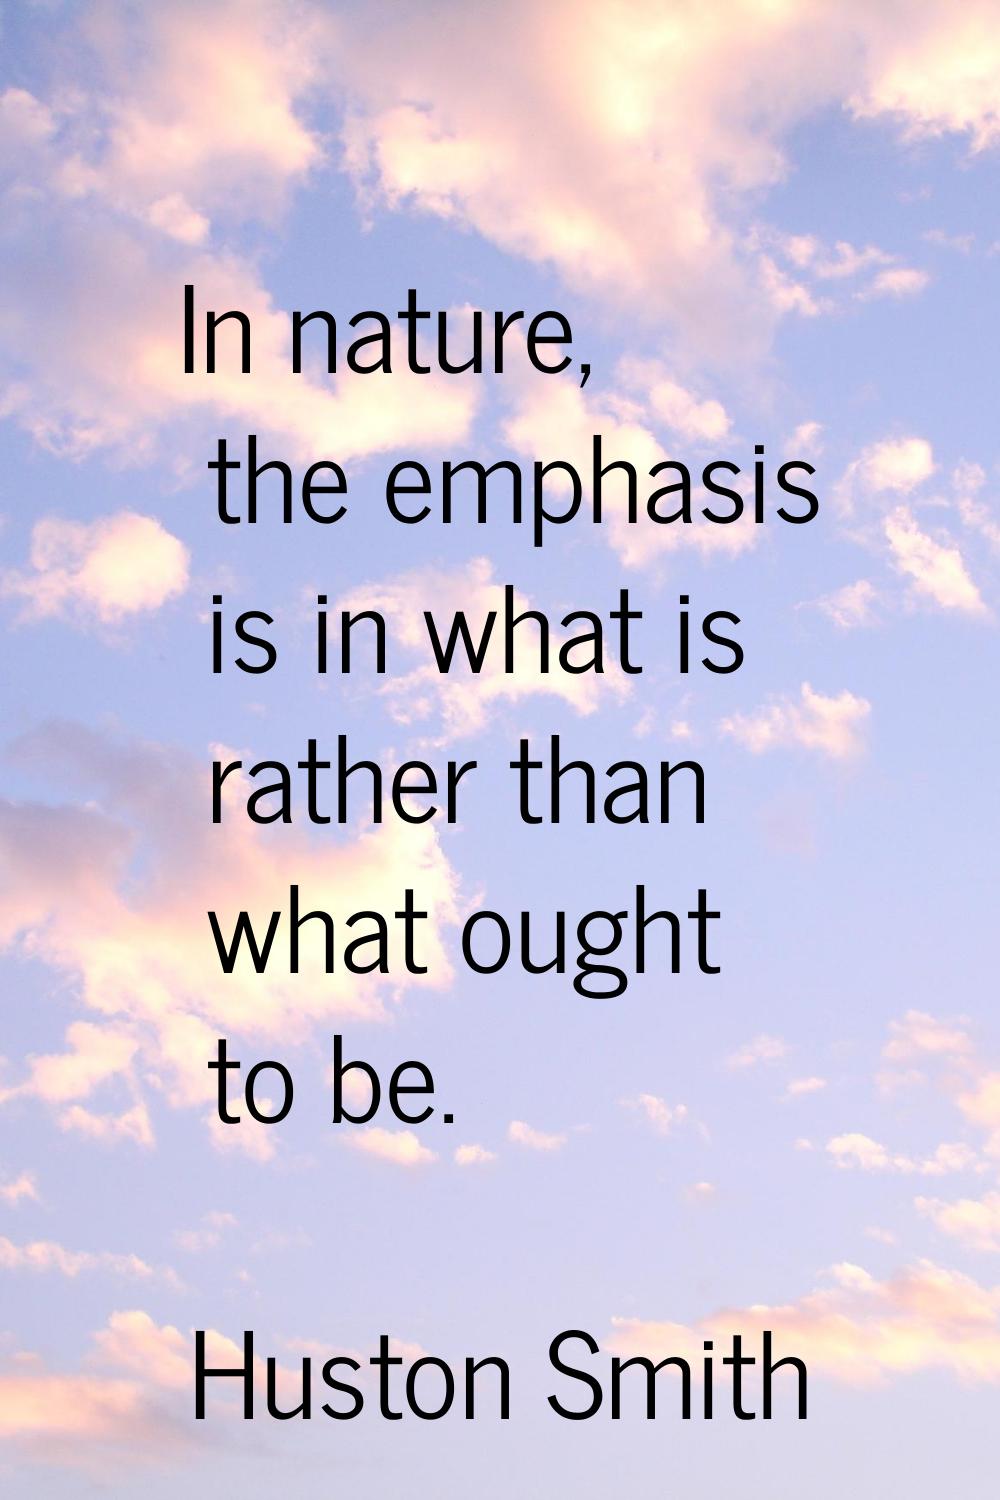 In nature, the emphasis is in what is rather than what ought to be.